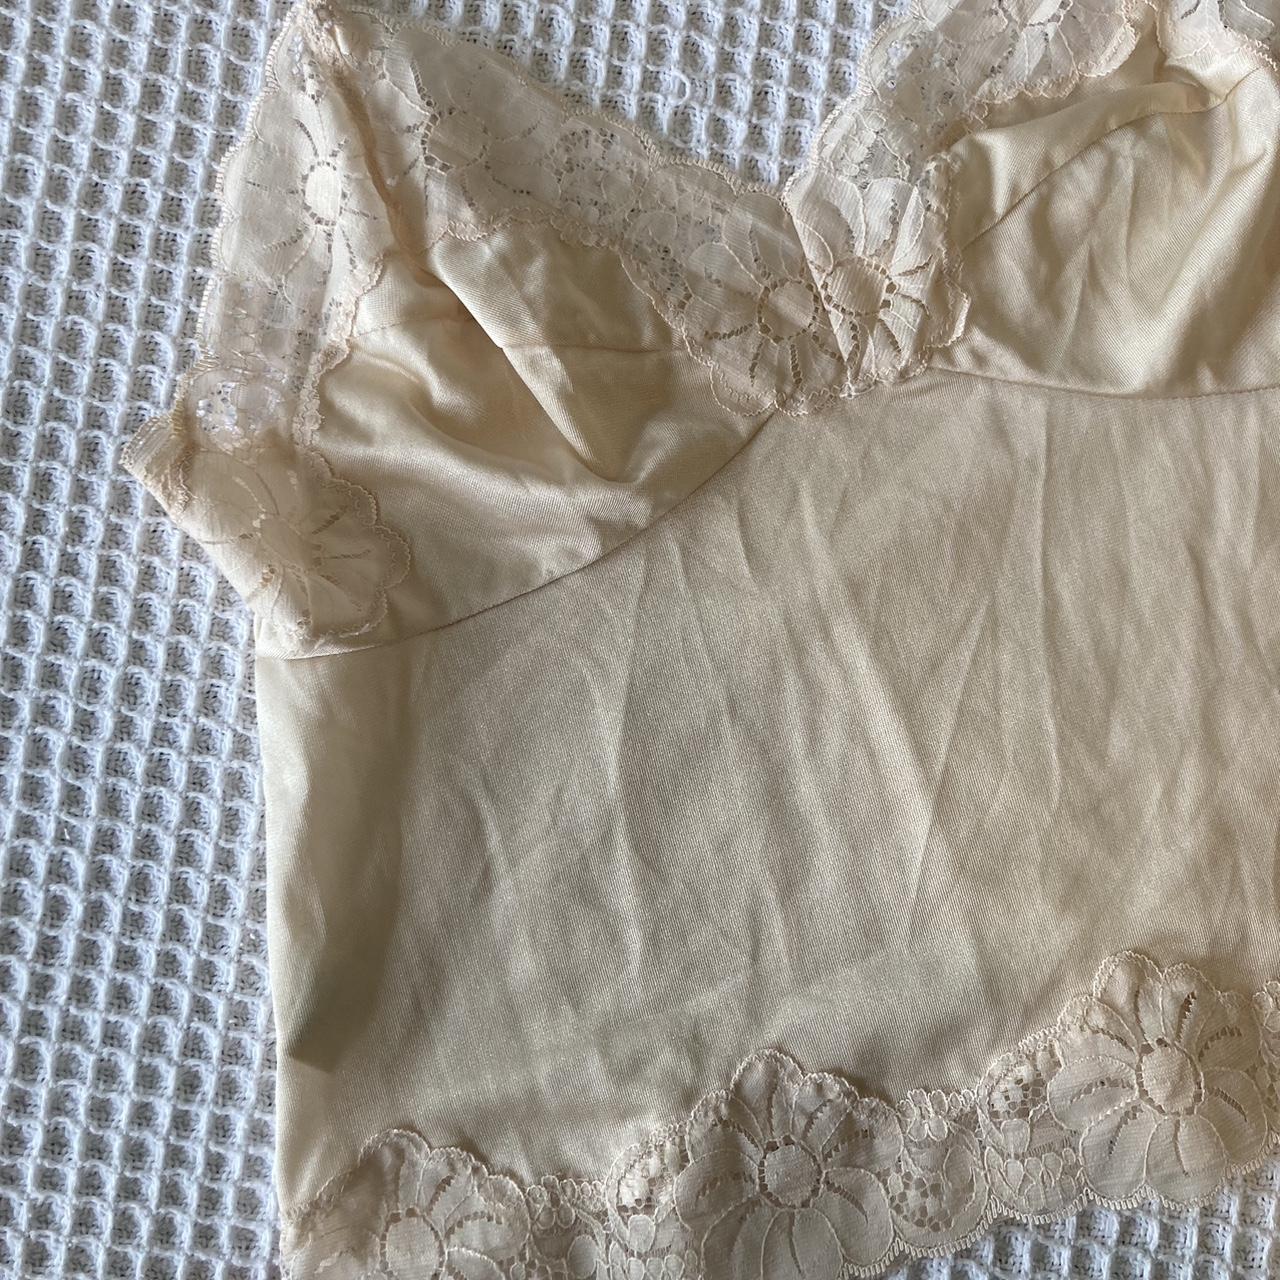 Nude Flesh Colour Lacy Negligee Cami Bralet Top... - Depop